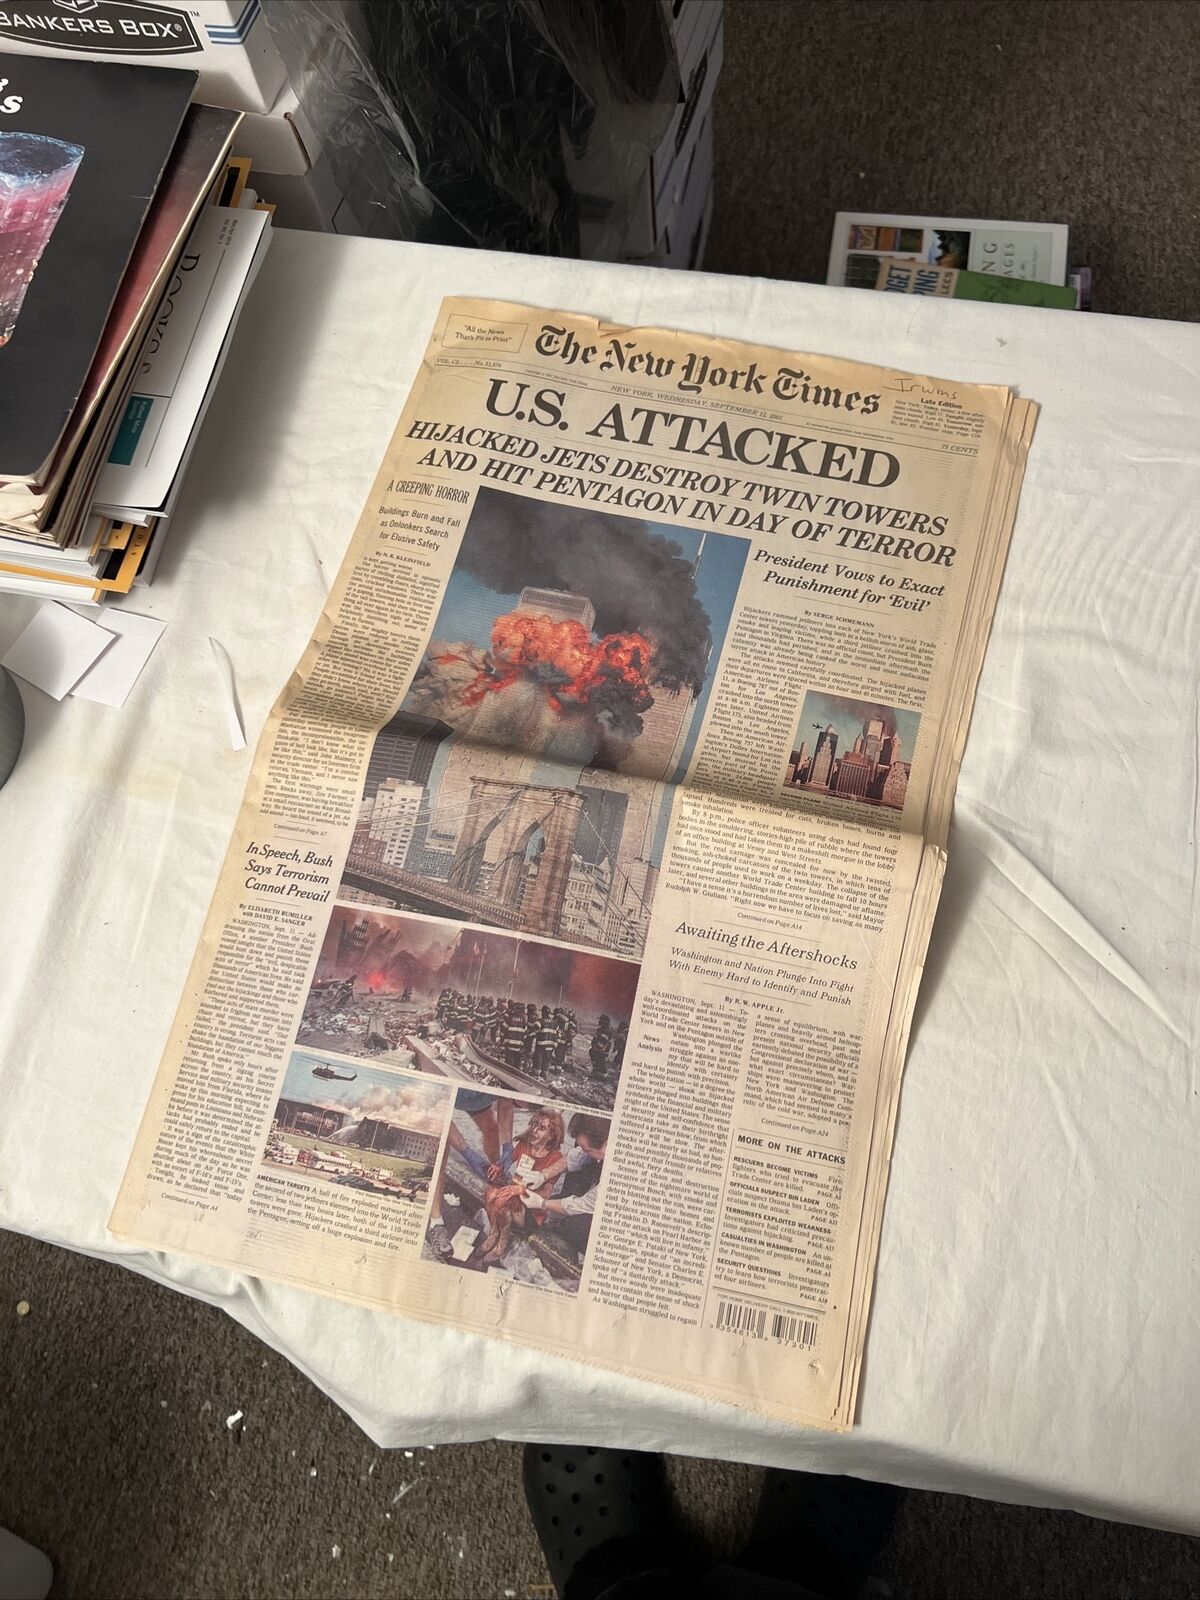 SEPTEMBER 12, 2001 EDITION OF THE NEW YORK TIMES —THE DAY AFTER 9/11 ATTACK.